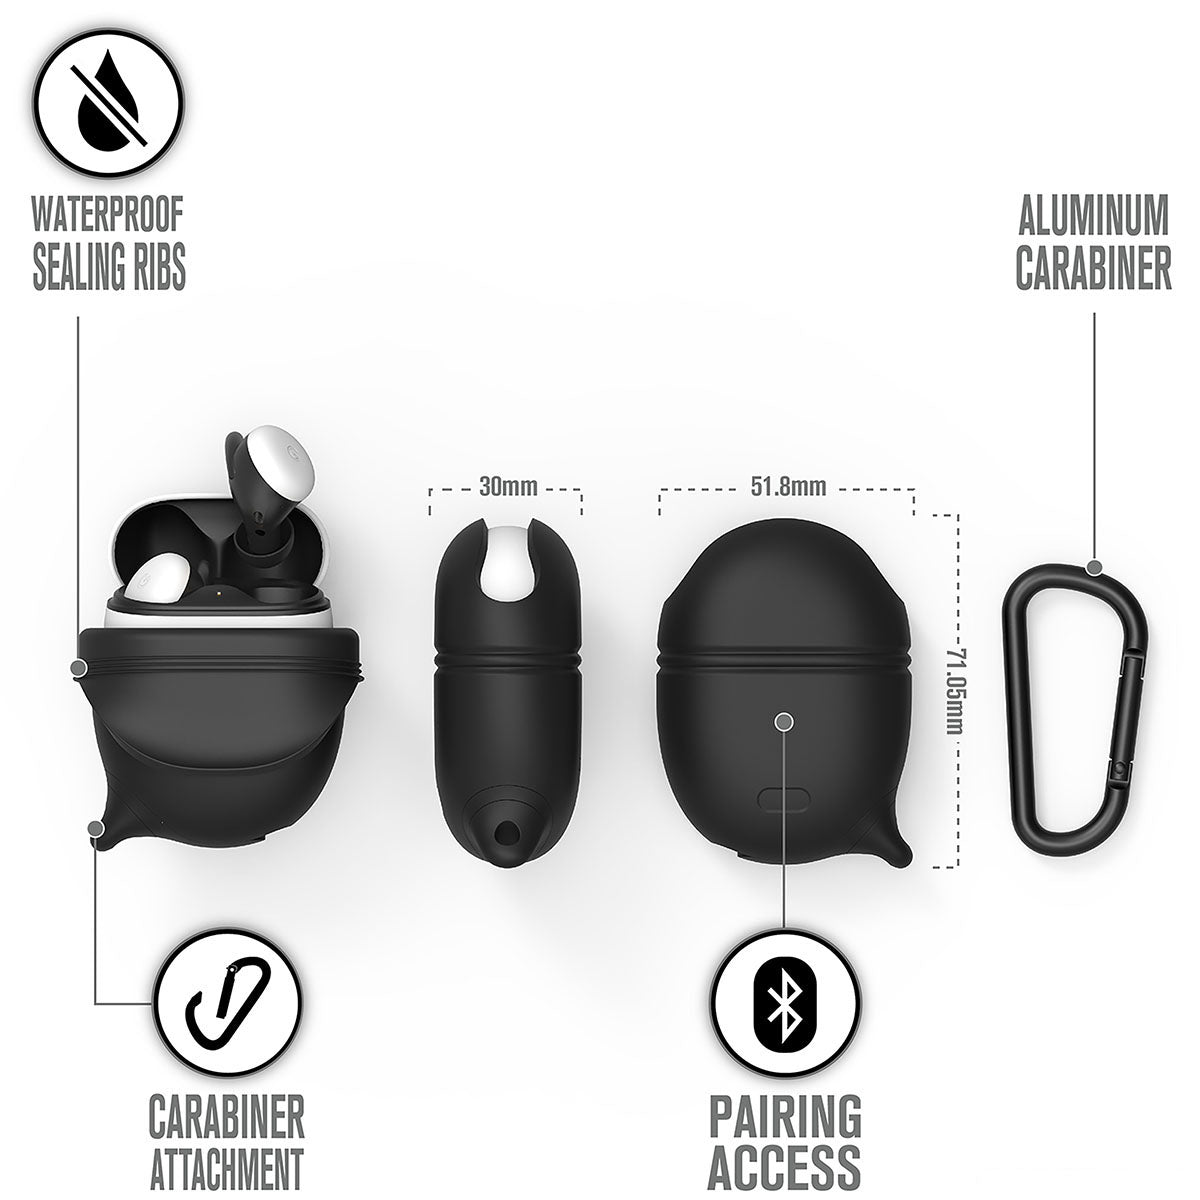  Catalyst google pixel buds 2 waterproof case carabiner showing the case dimension and features text reads waterproof sealing ribs aluminum carabiner pairing access carabiner attachment 